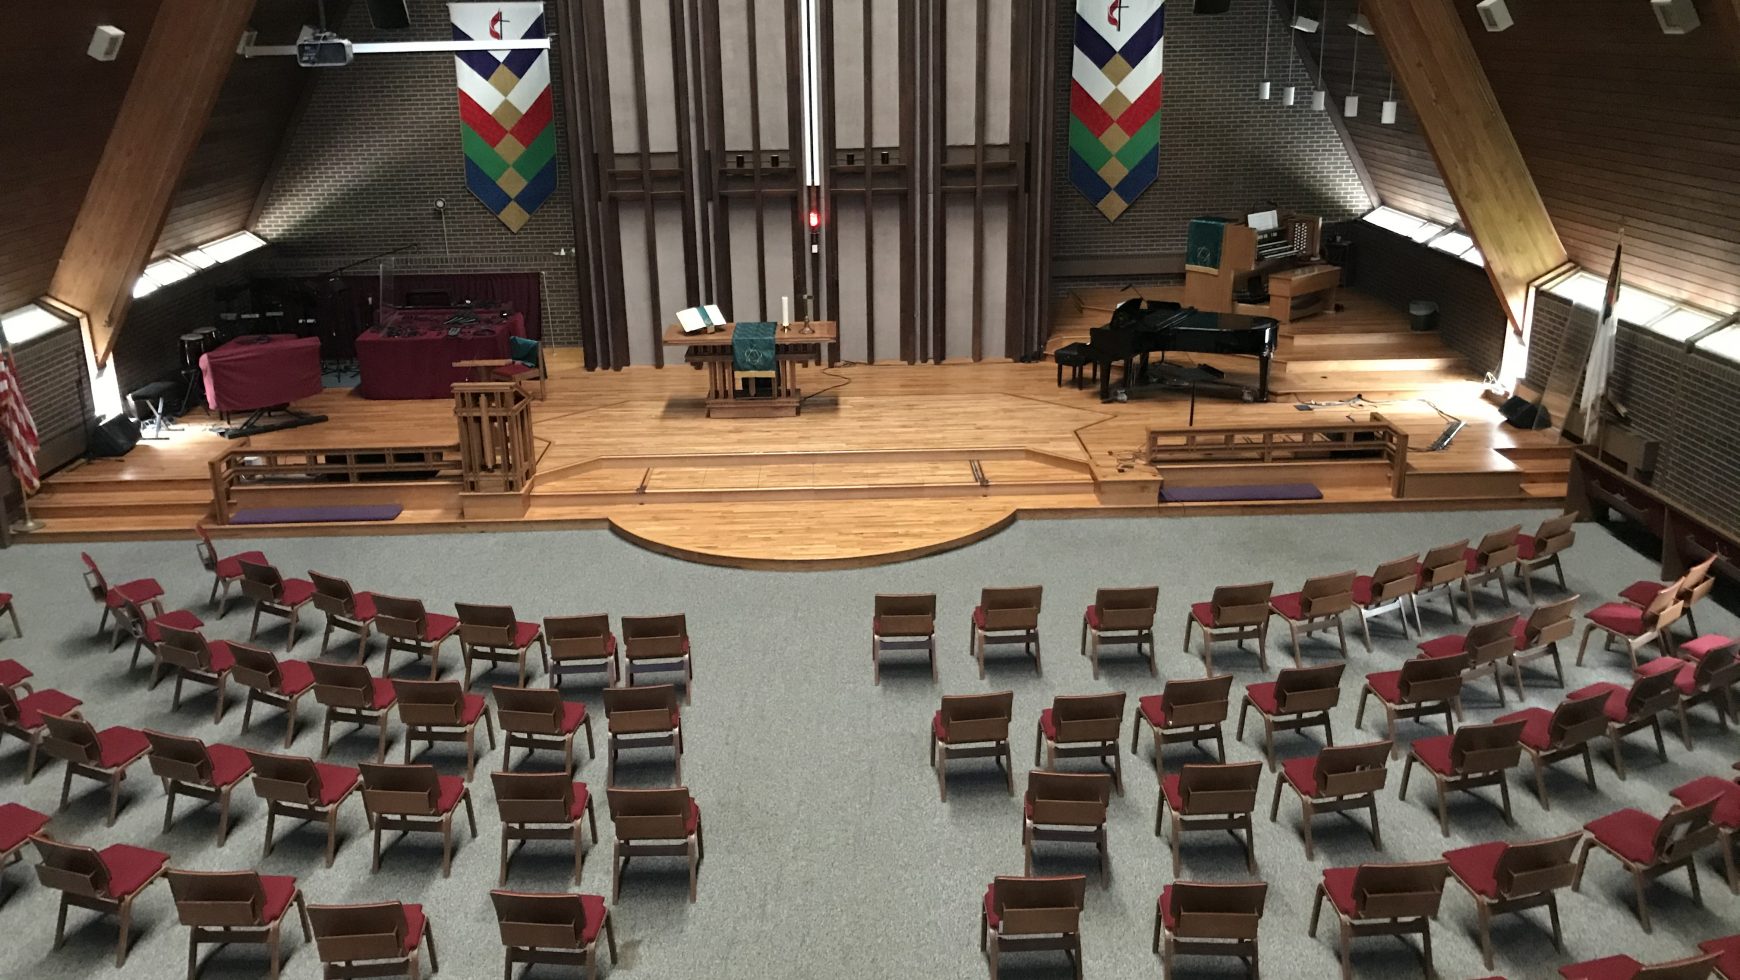 New Sanctuary Seating Configuration Allows for Safe Distancing